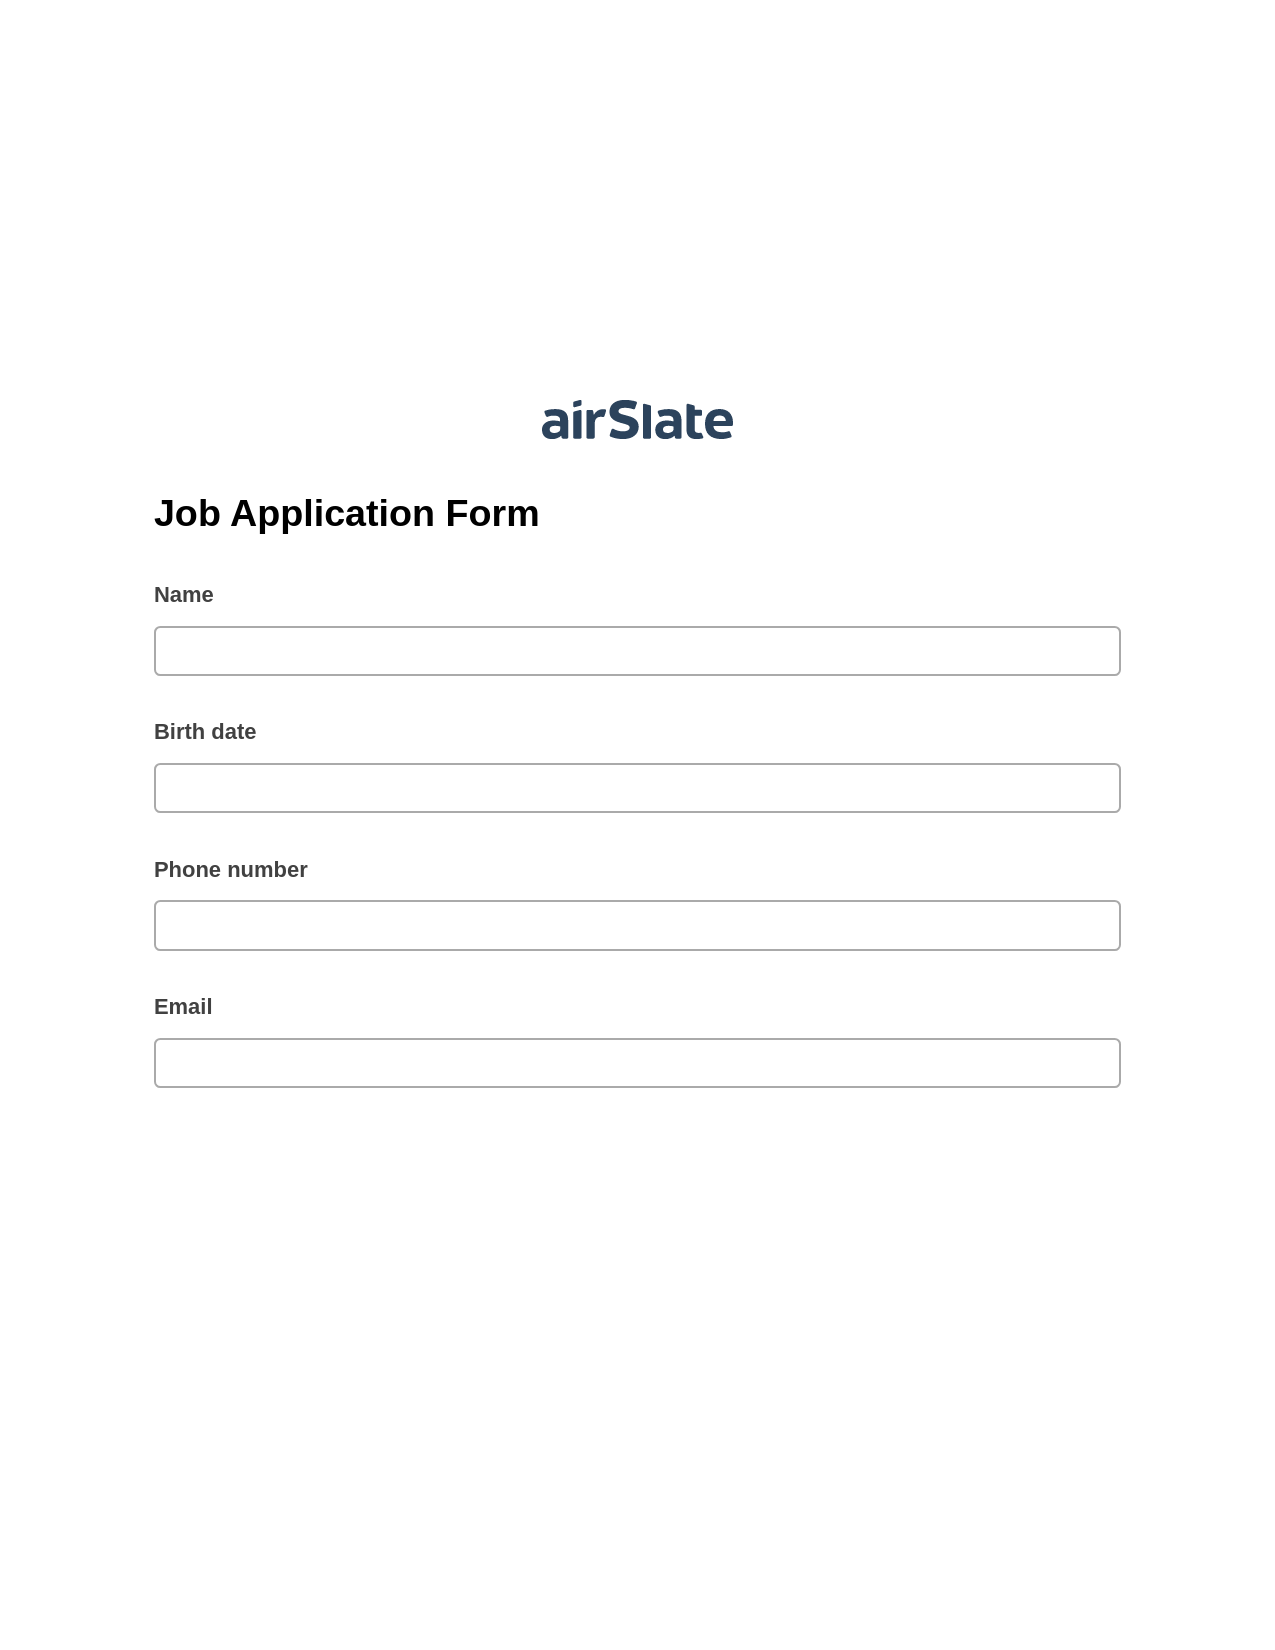 Multirole Job Application Form Pre-fill from Google Sheets Bot, Create MS Dynamics 365 Records Bot, Archive to SharePoint Folder Bot